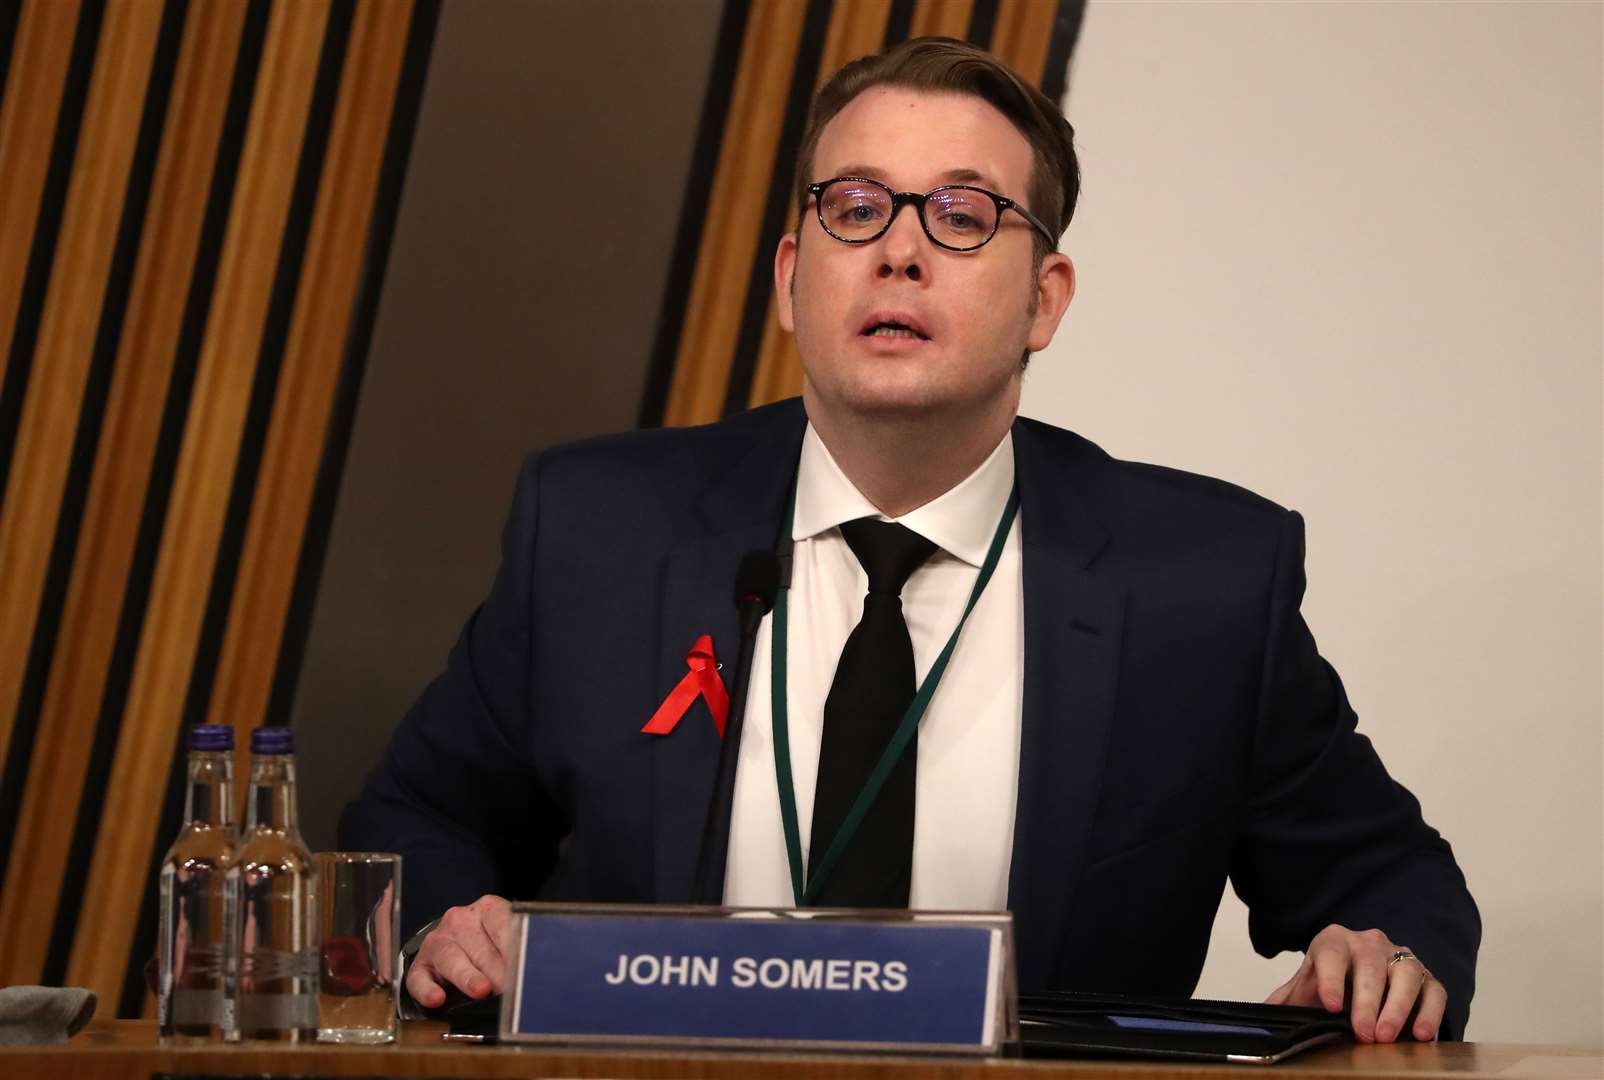 John Somers Principle Private Secretary to the First Minister said he did not tell anyone other than his line manager about a woman’s claims of sexual harassment by Alex Salmond (Andrew Milligan/PA)